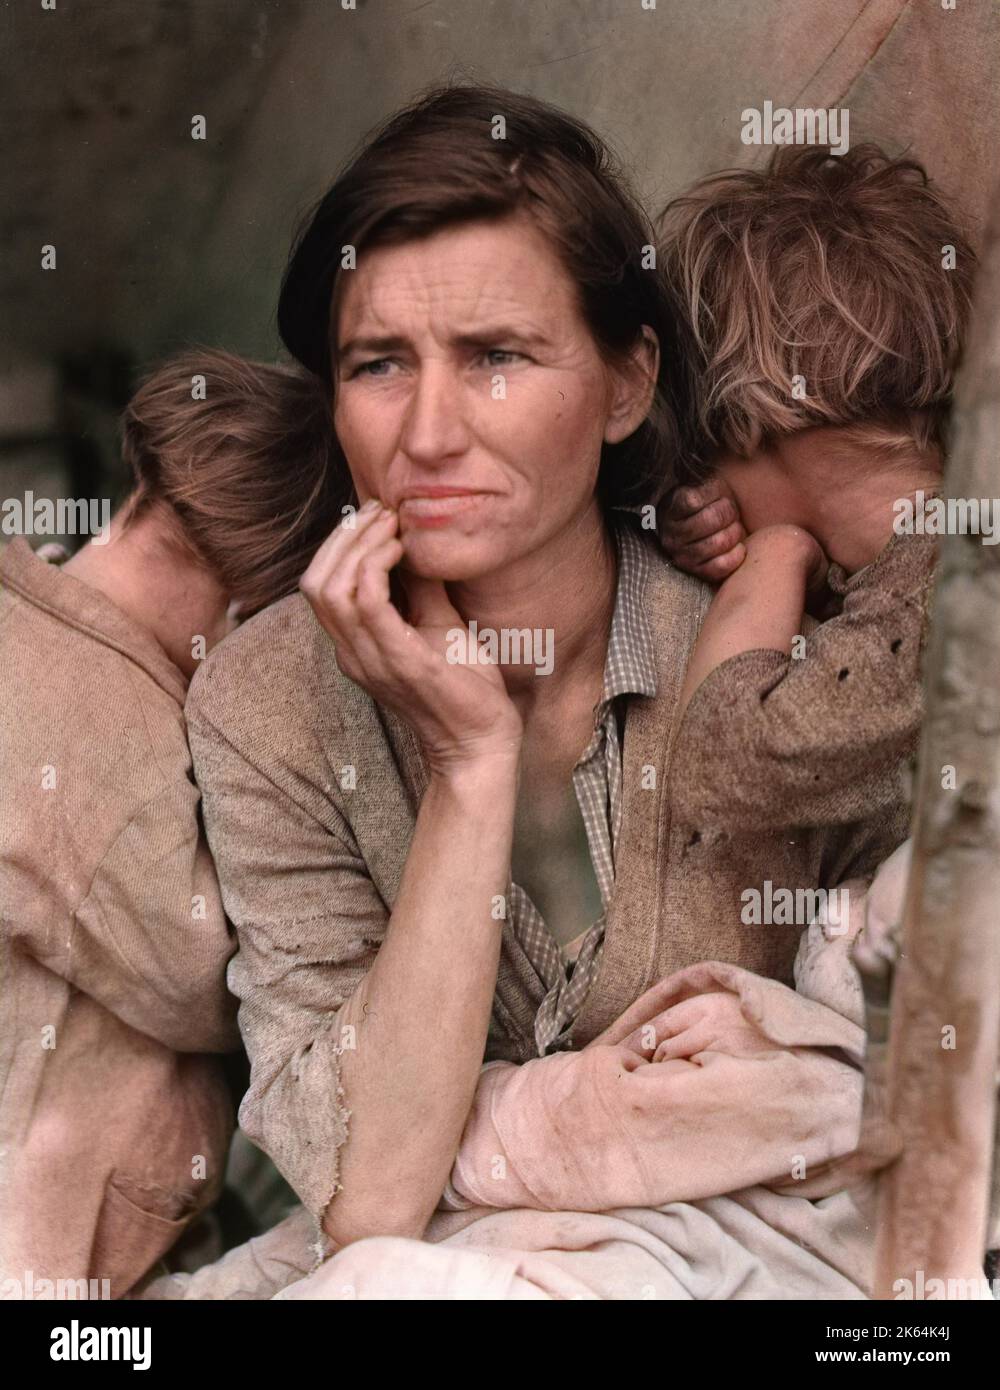 Destitute pea pickers in California. Mother of seven children. Age thirty-two. Nipomo, California. Photograph shows Florence Thompson with three of her children in a photograph known as Migrant Mother.  Destitute pea pickers in California. Mother of seven children. Age thirty-two. Nipomo, California. Photograph shows Florence Thompson with three of her children in a photograph known as Migrant Mother. Stock Photo